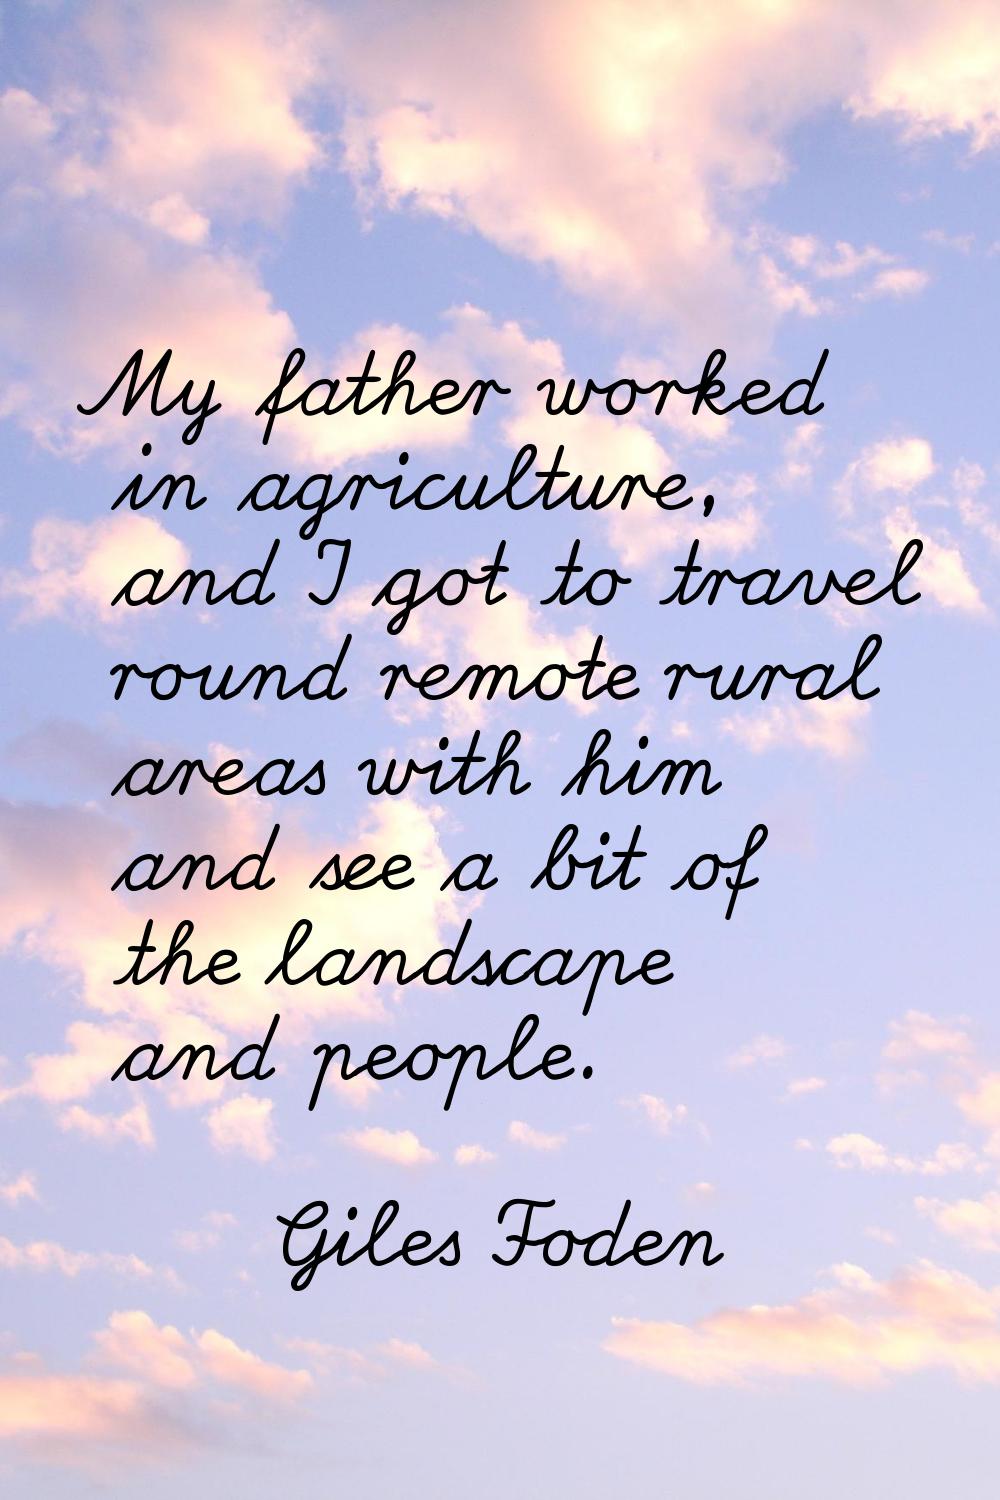 My father worked in agriculture, and I got to travel round remote rural areas with him and see a bi